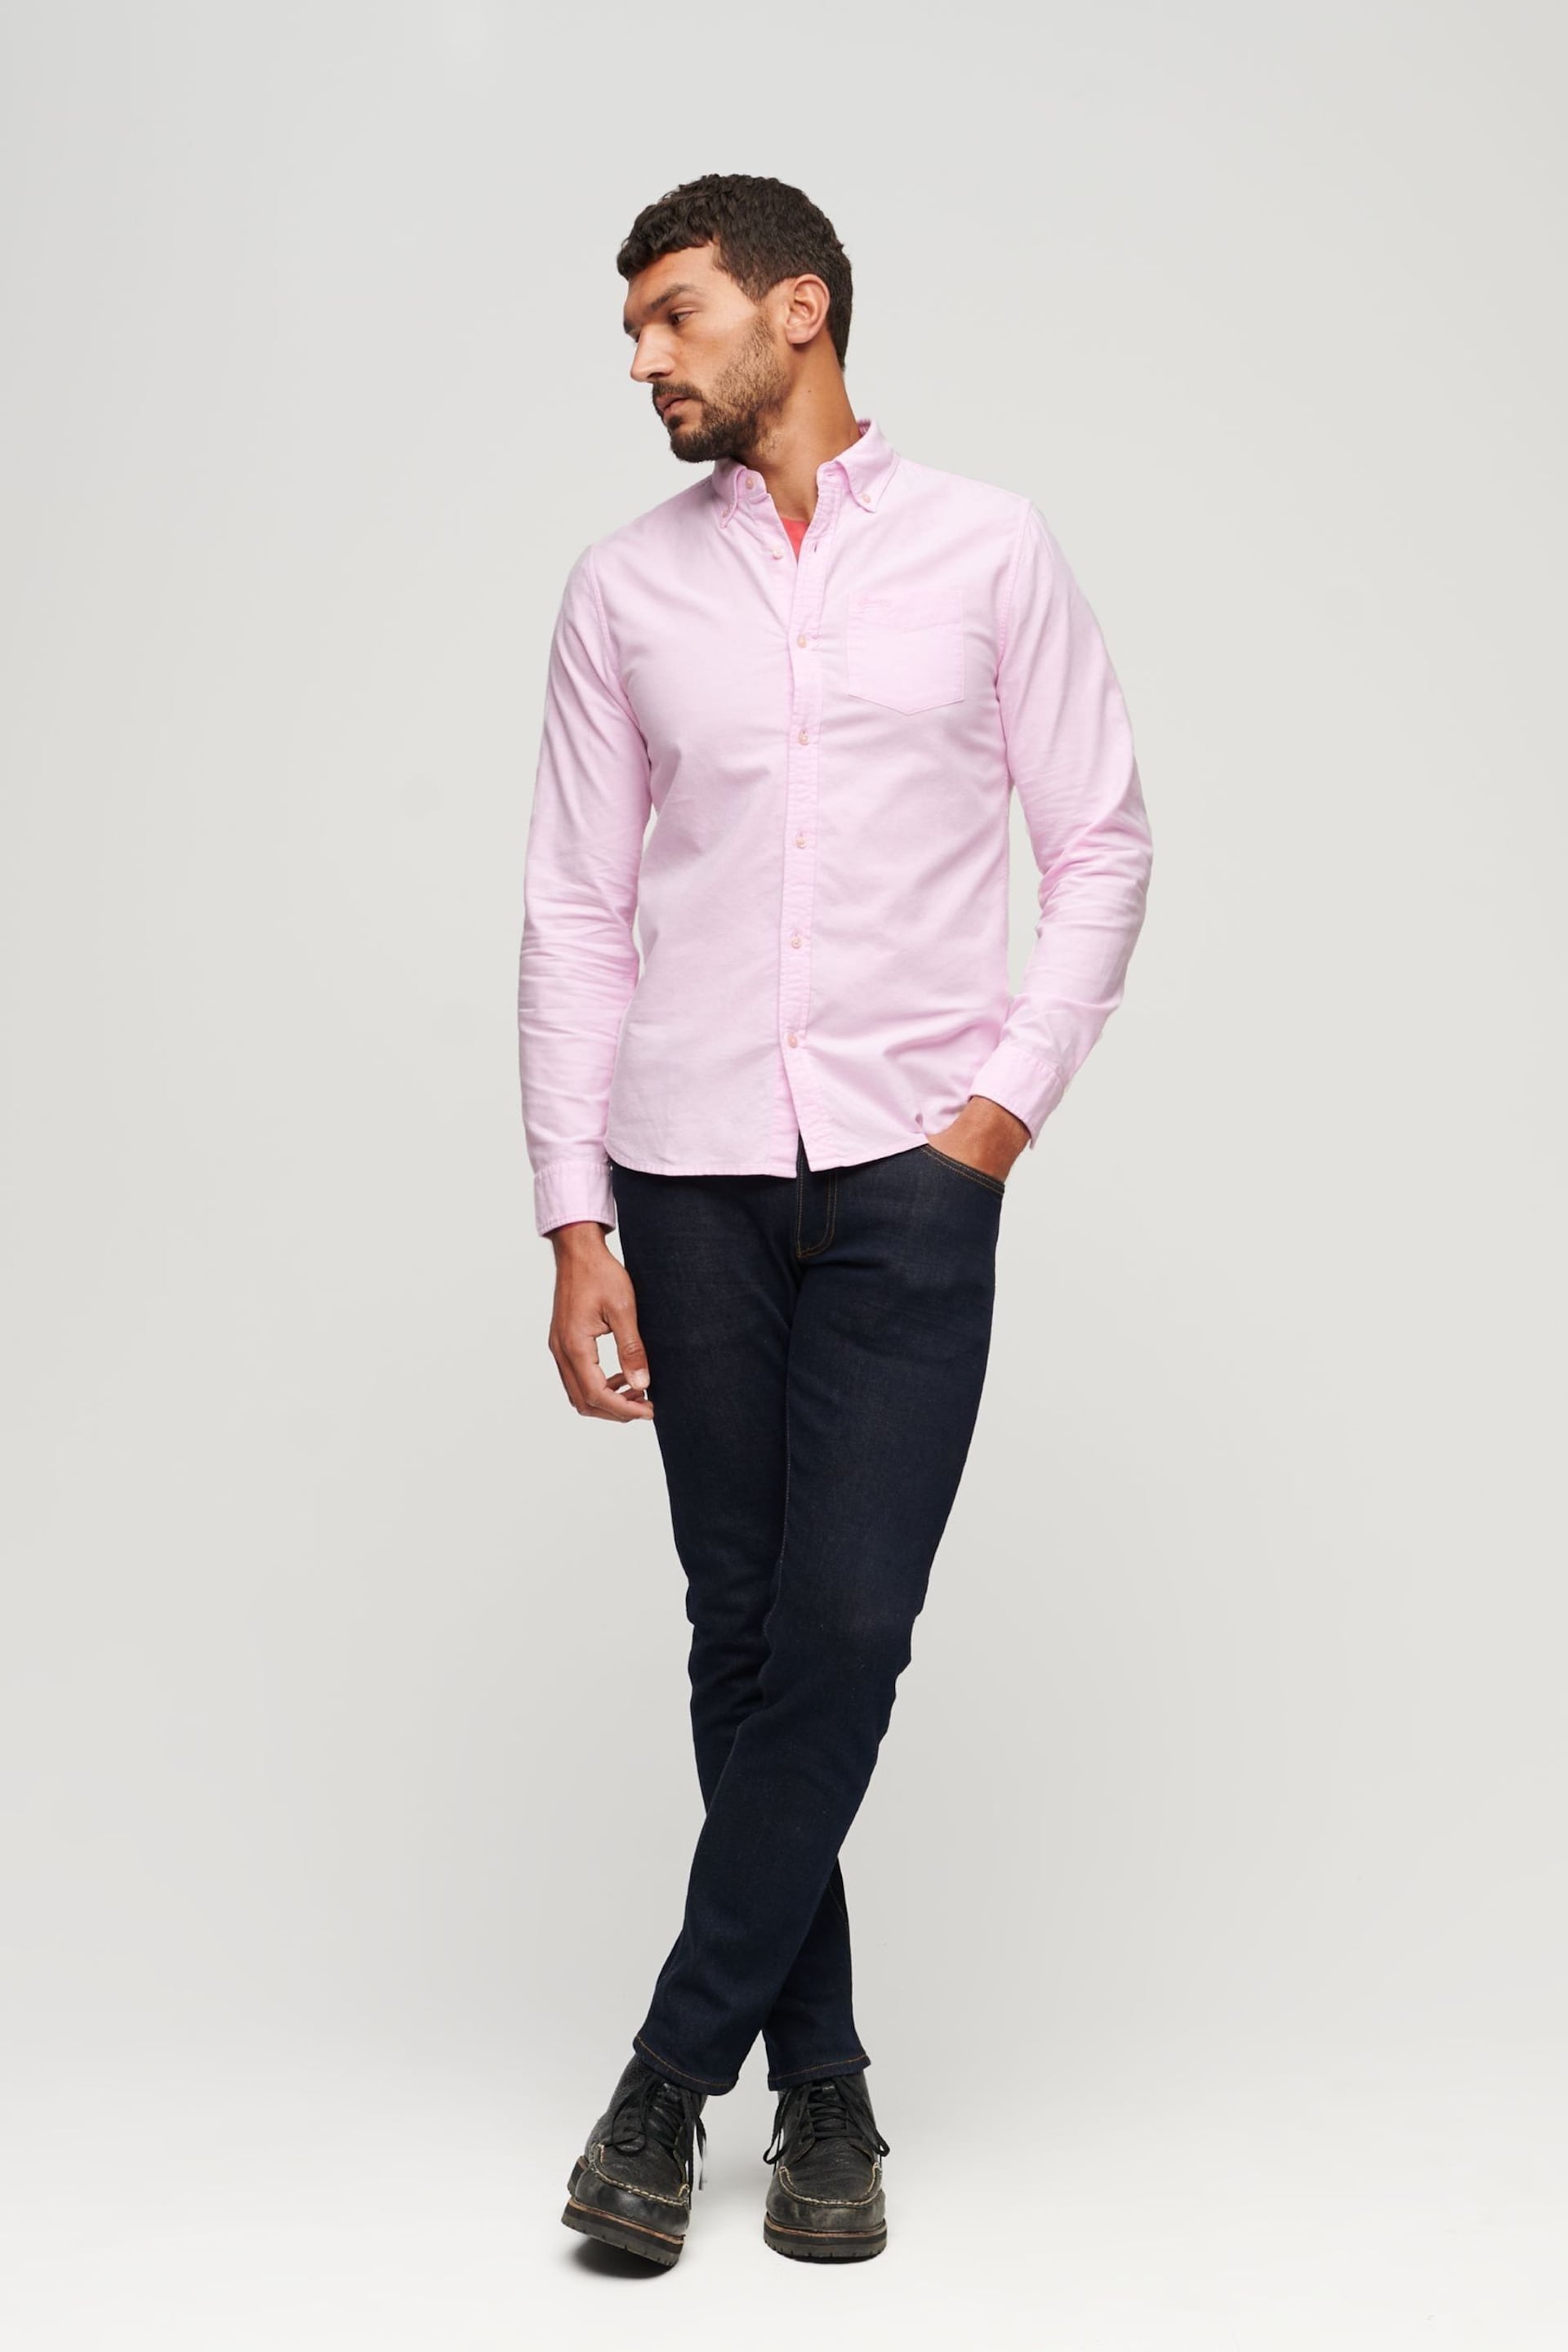 Superdry Pink Cotton Long Sleeved Oxford Shirt - Image 2 of 10